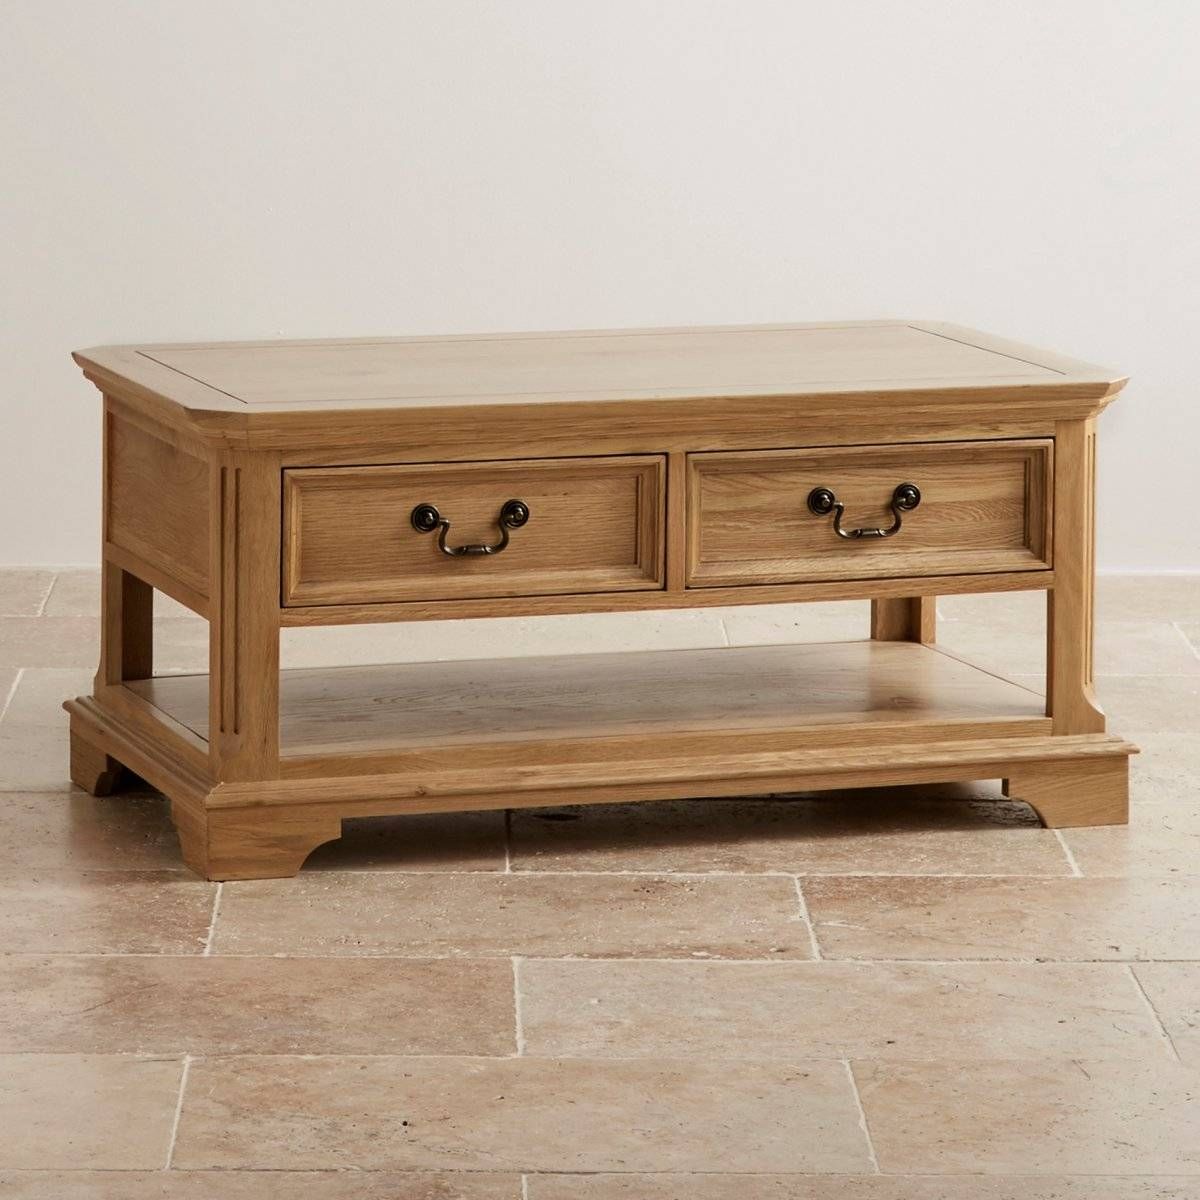 Edinburgh Coffee Table In Natural Solid Oak | Oak Furniture Land For Oak Coffee Table With Drawers (View 4 of 15)